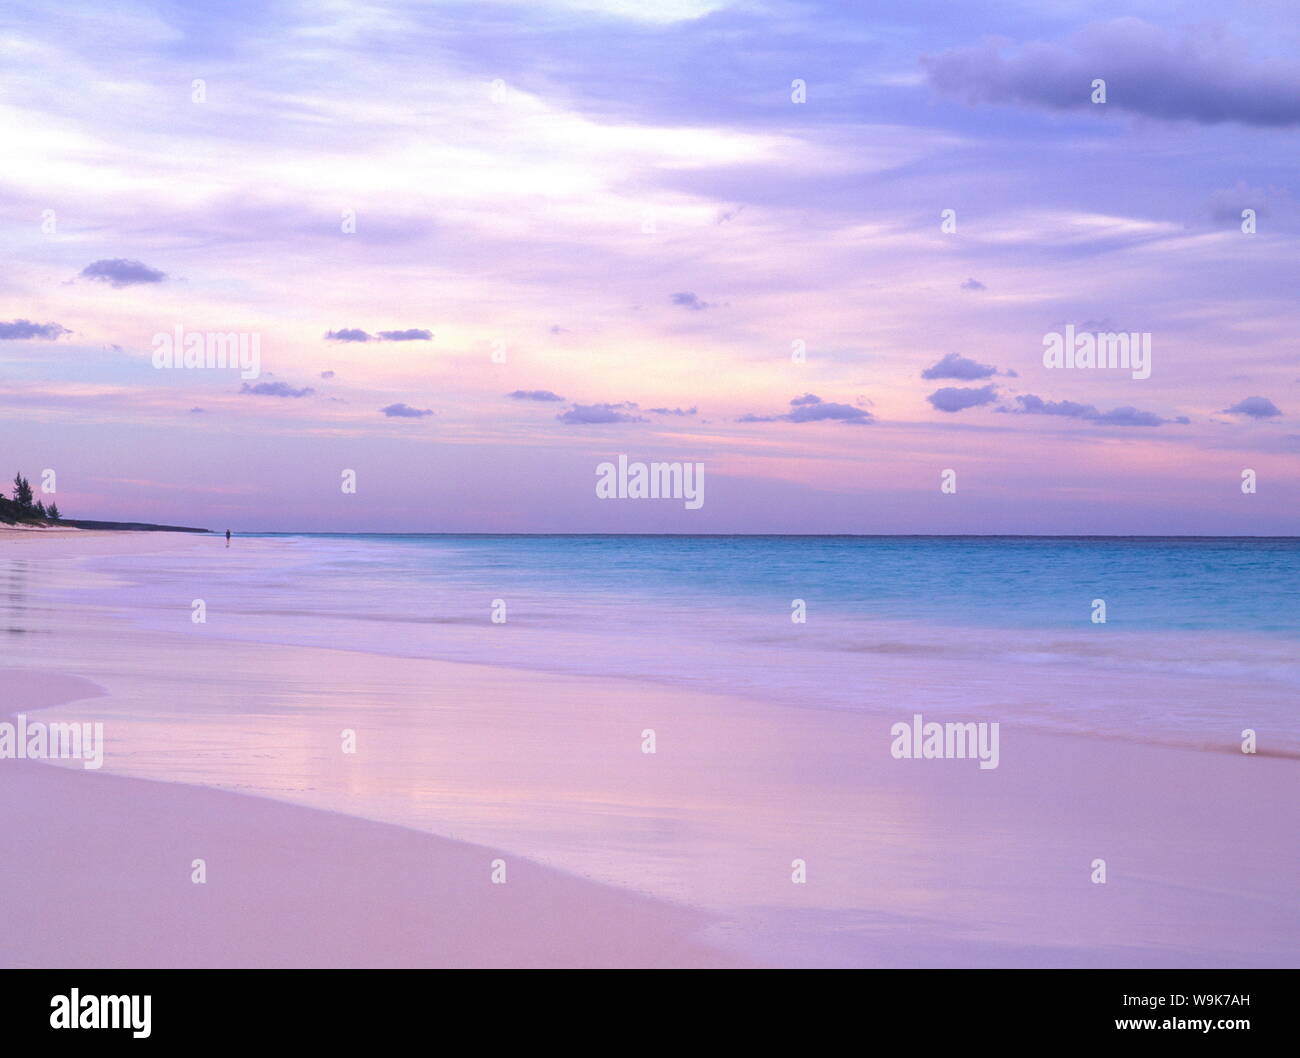 Pink Sands Beach at dusk with a person in the distance, Harbour Island, Eleuthera, The Bahamas, West Indies, Atlantic, Central America Stock Photo